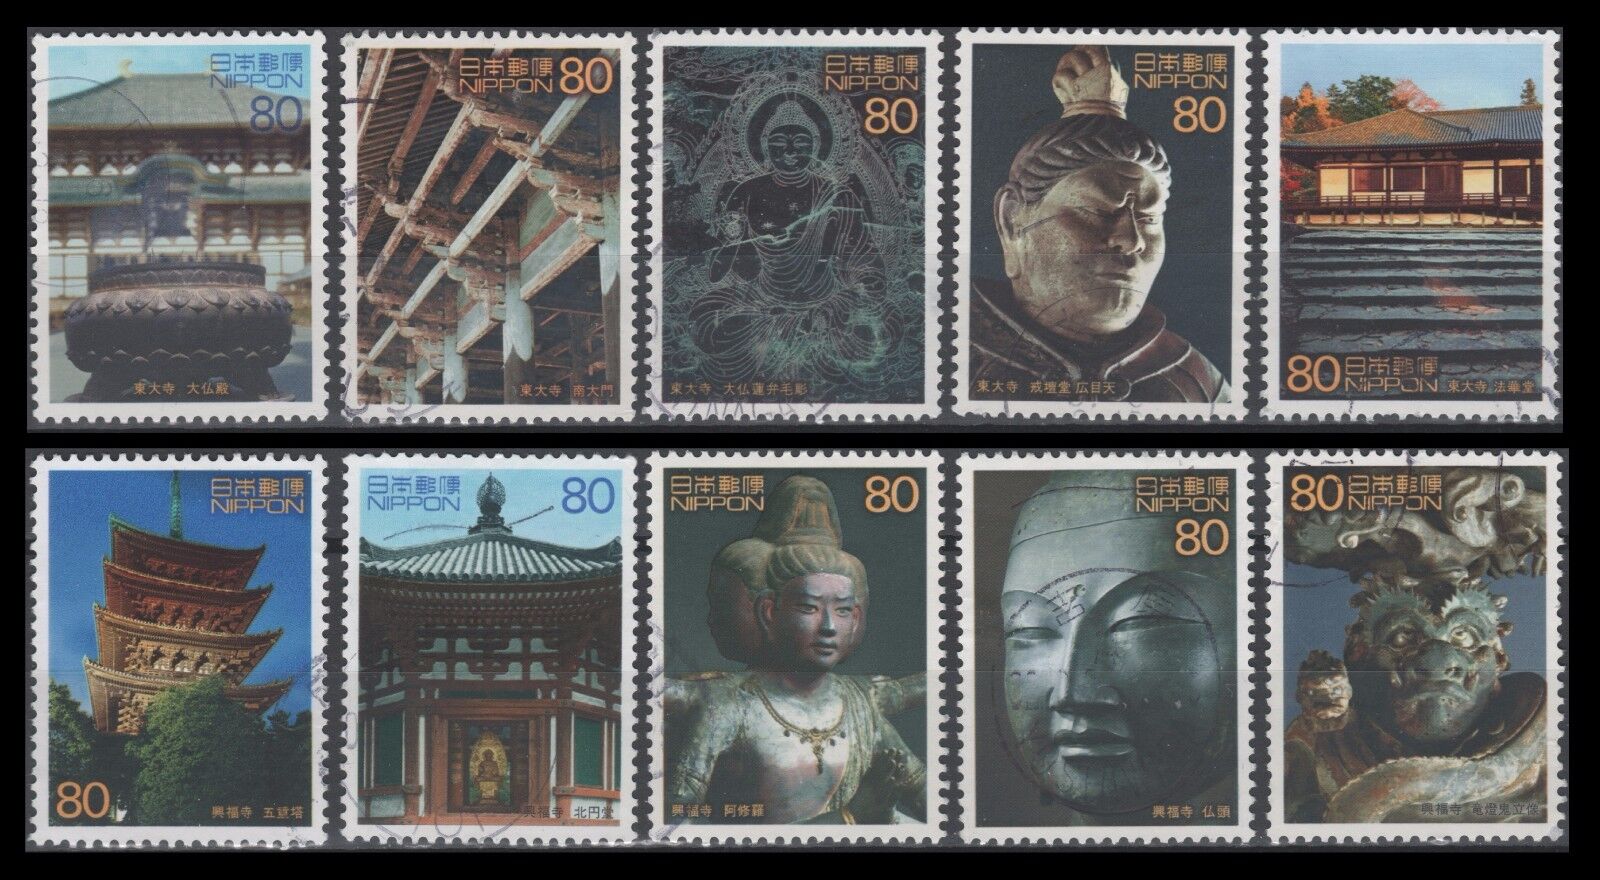 Japan 2820a-j USED Year-end gift Singles Award from Site sheet World Heritage 7